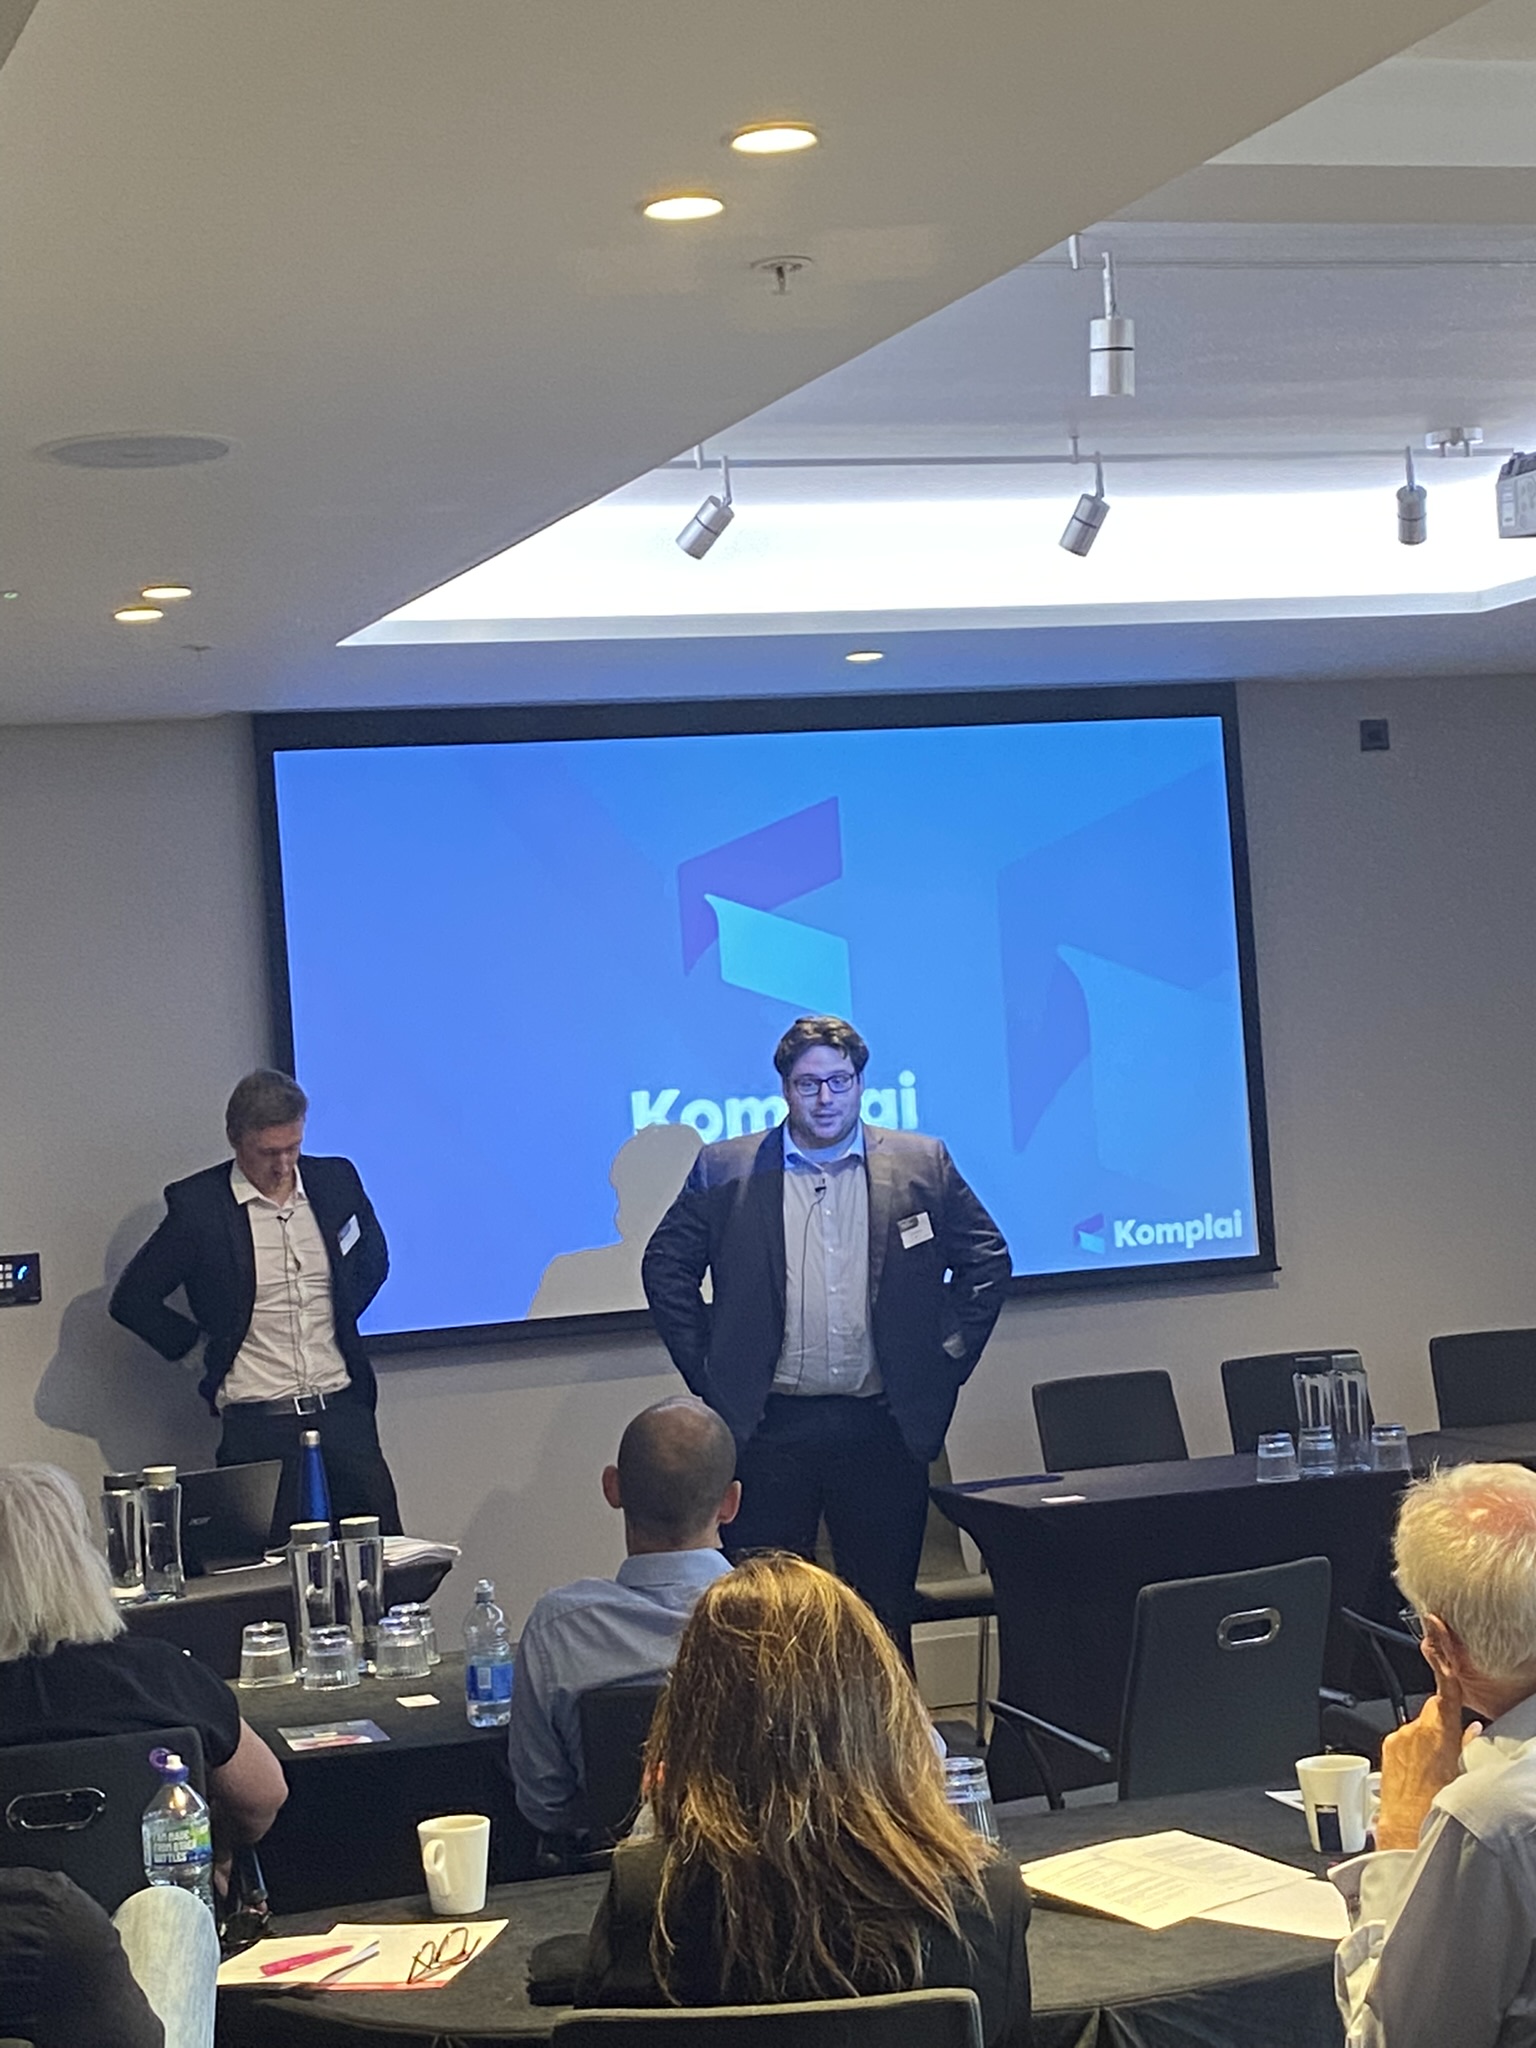 Gregory Lawton, CTO/Founder and Jack Symons, CEO/Founder, Komplai at the KnowNow Compliance Forum